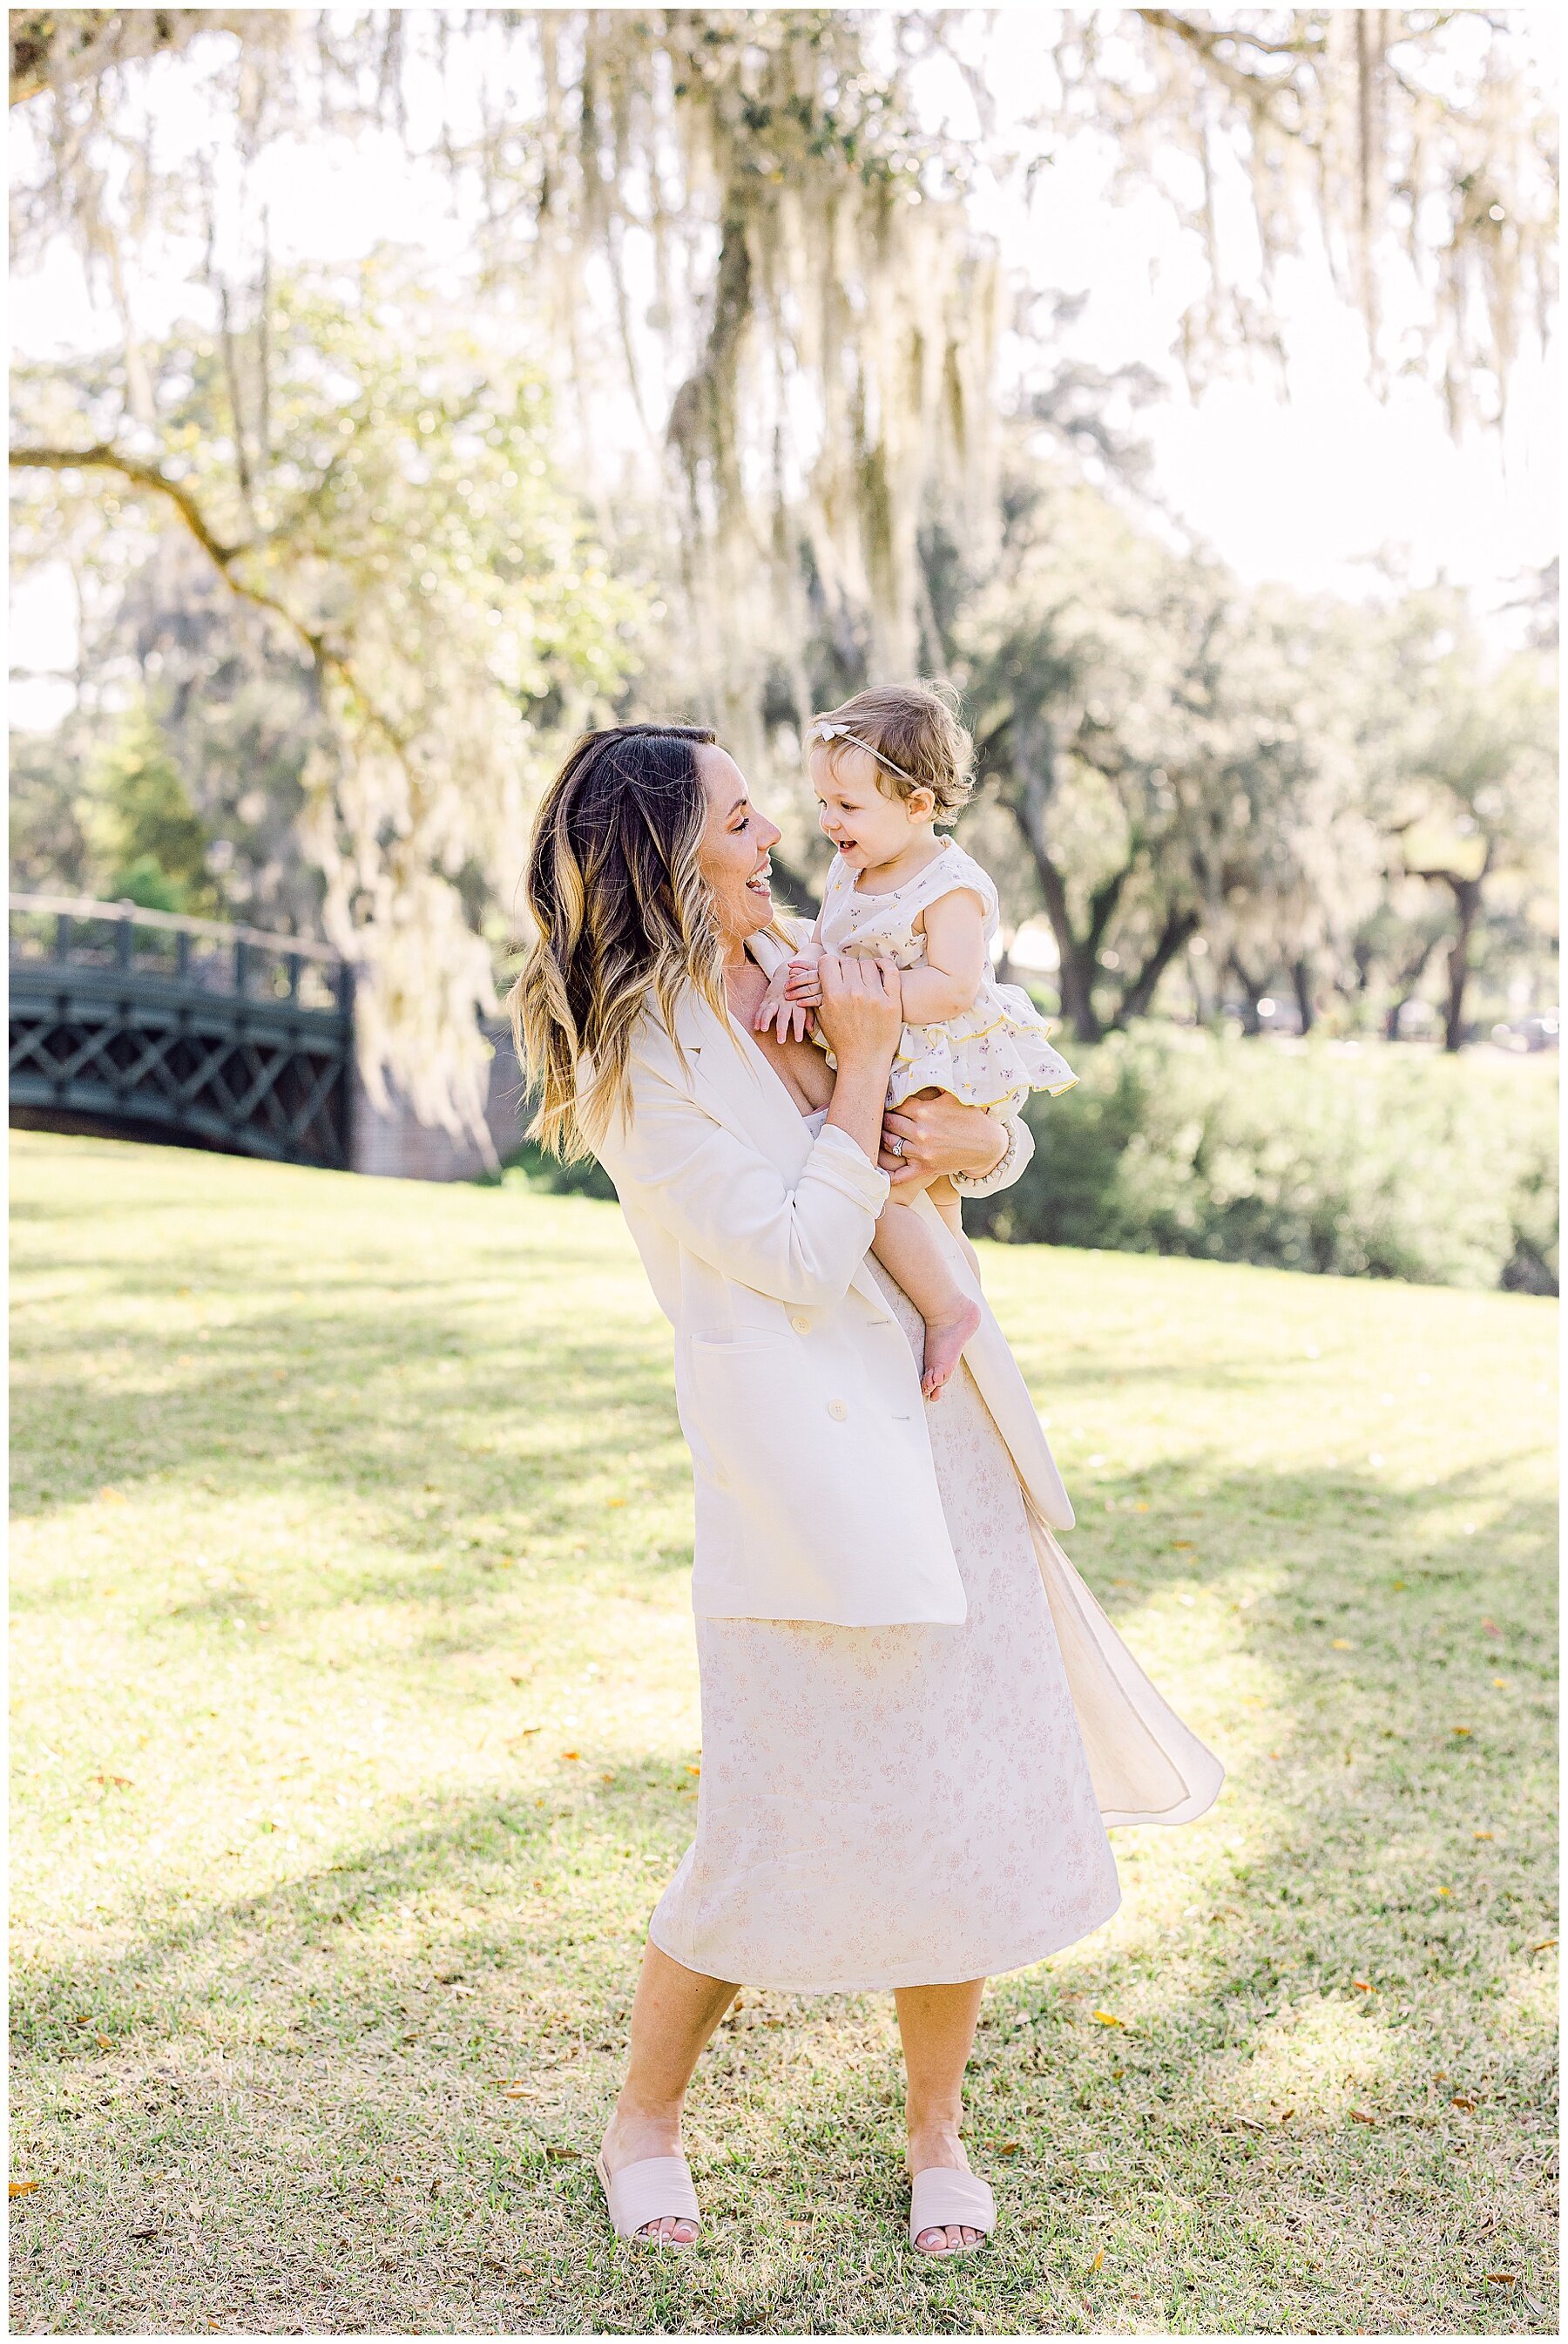 Katherine_Ives_Photography_Sallah_Palmetto_Bluff_Family_Session_42.JPG